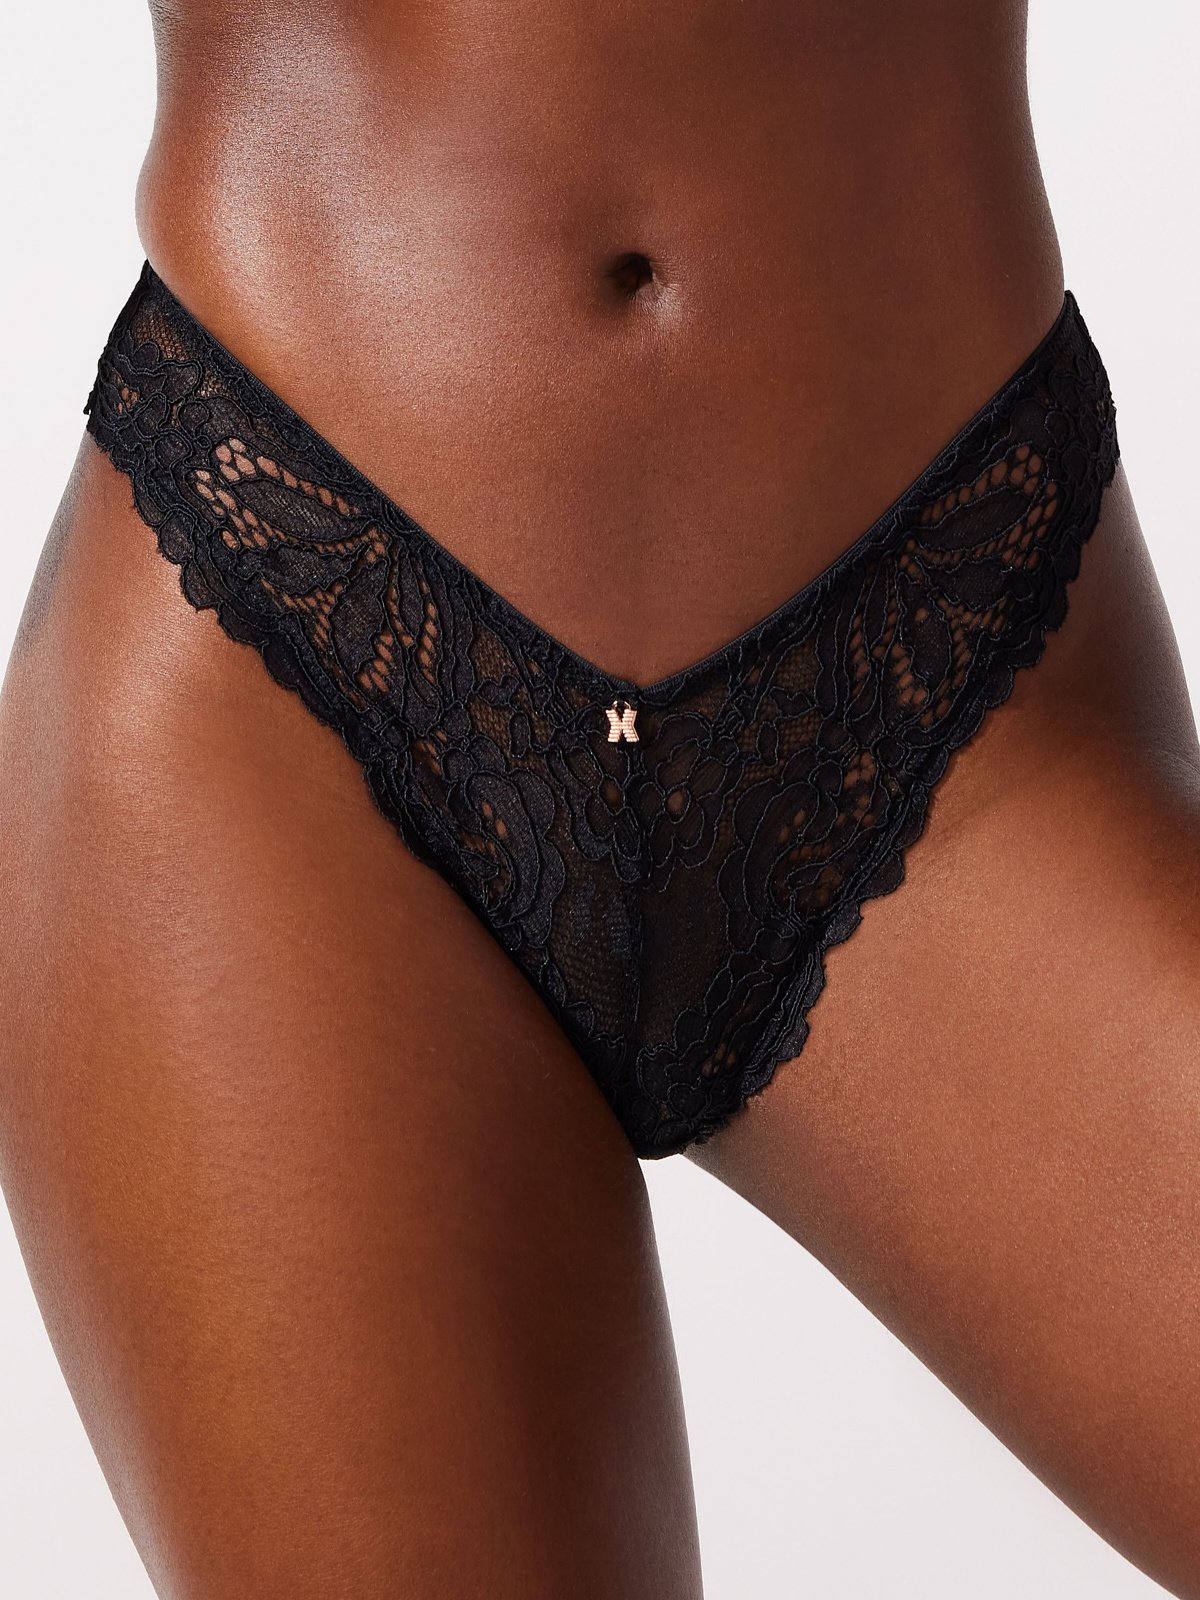 Romantic Corded Lace Thong Panty